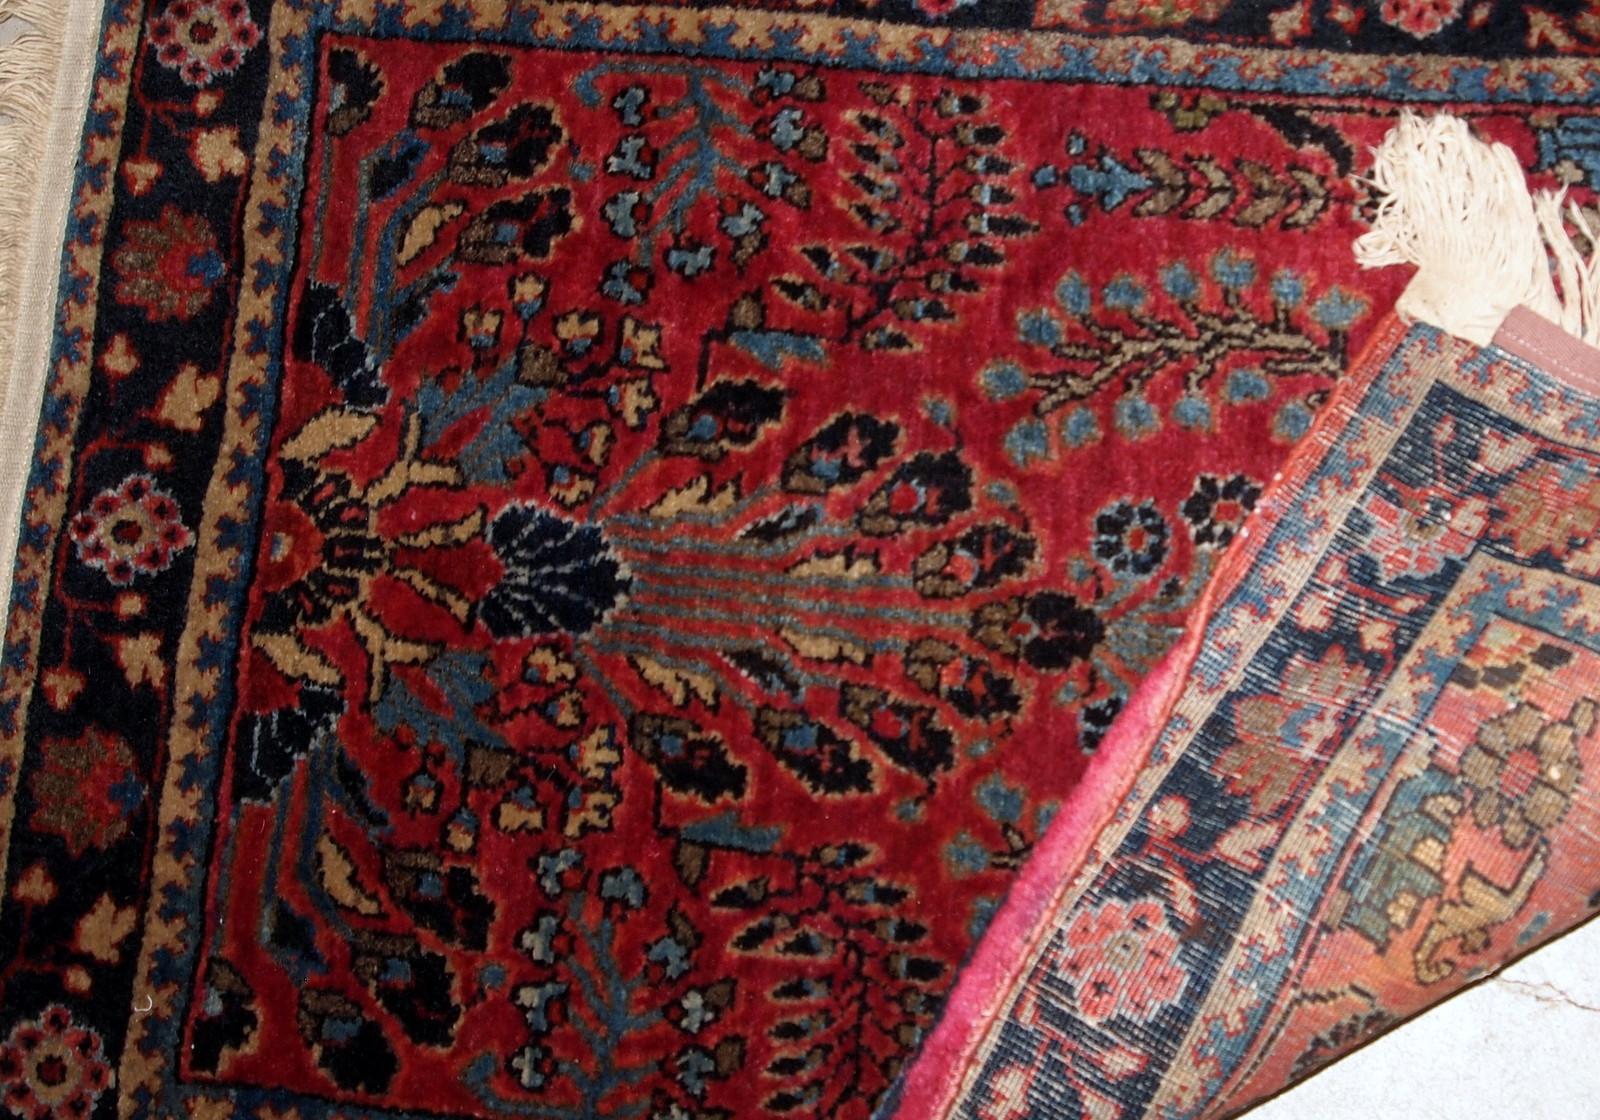 Handmade antique Sarouk style rug in original good condition. The rug is from the beginning of 20th century made in Traditional design.

- Condition: original good,

- circa 1920s,

- Size: 2.1' x 3.2' (64 cm x 97 cm),

- Material: wool

-